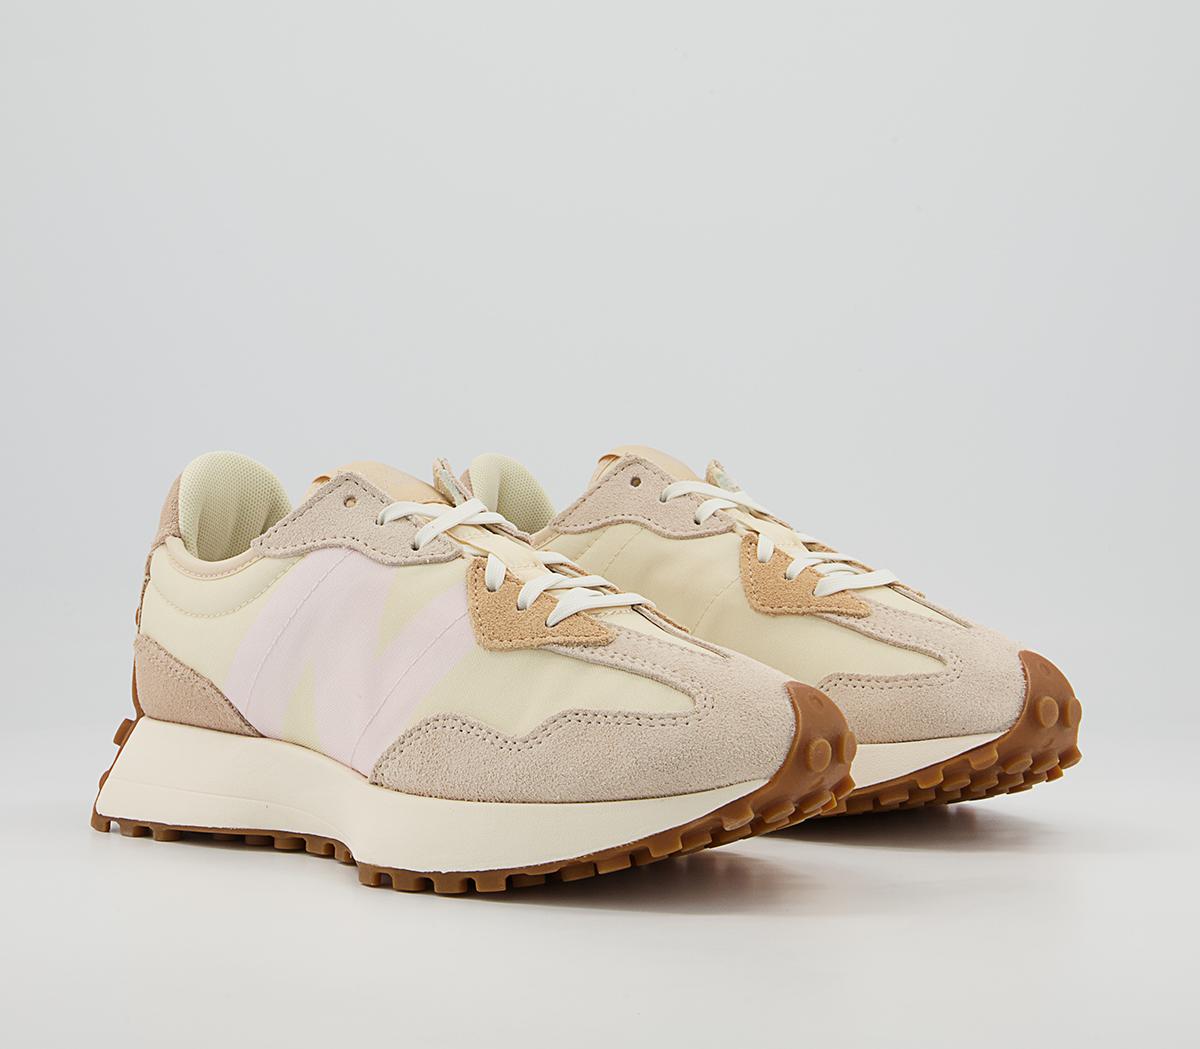 New Balance 327 Trainers Oatmeal Crystal Pink Beige - Women's Trainers